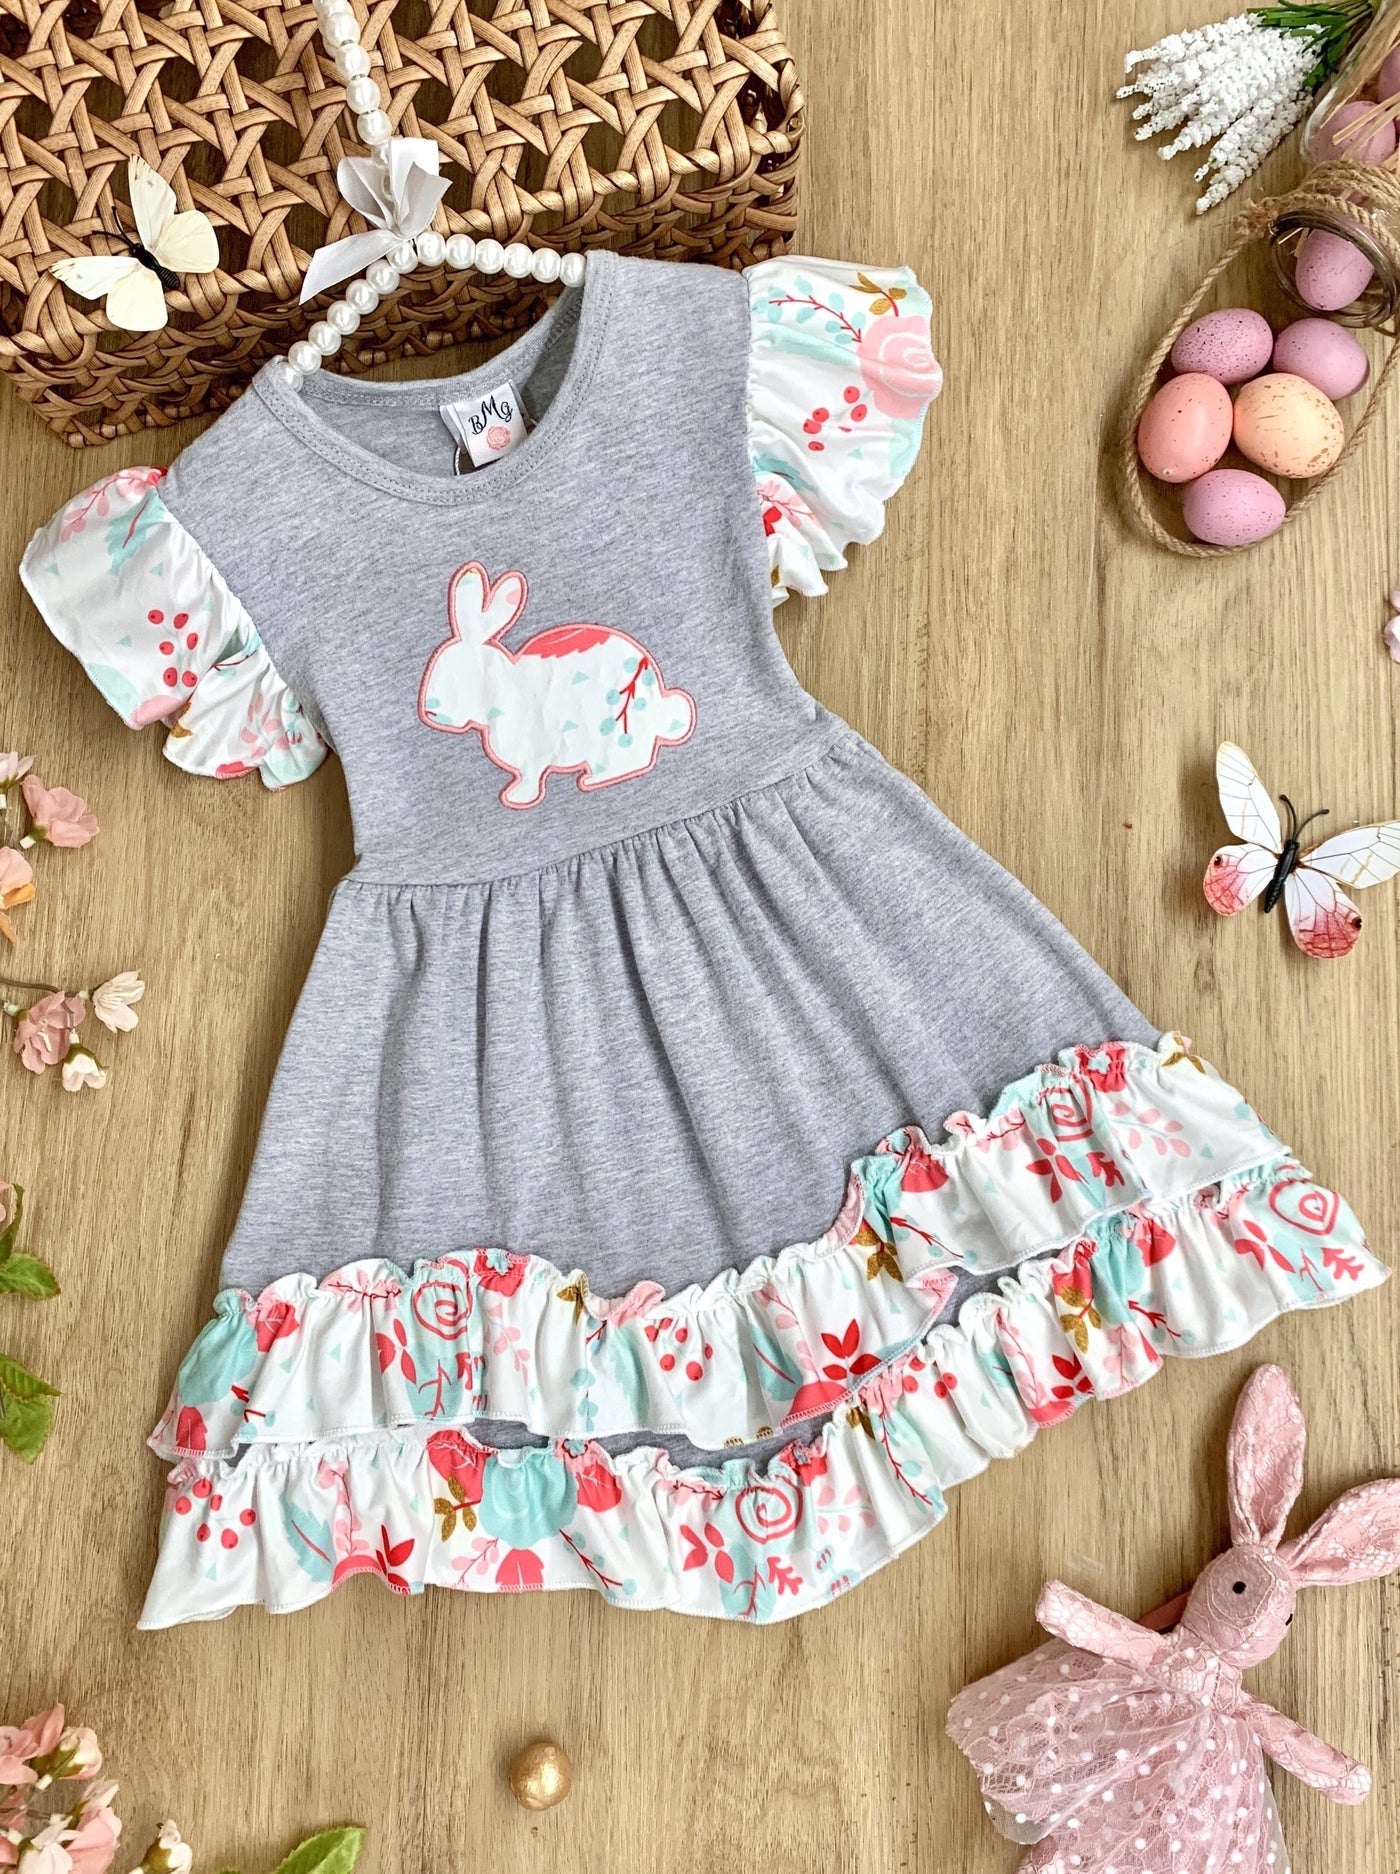 Easter-themed dress features short flutter sleeves and skirt hem with a cute bunny print - Girls Easter Dress